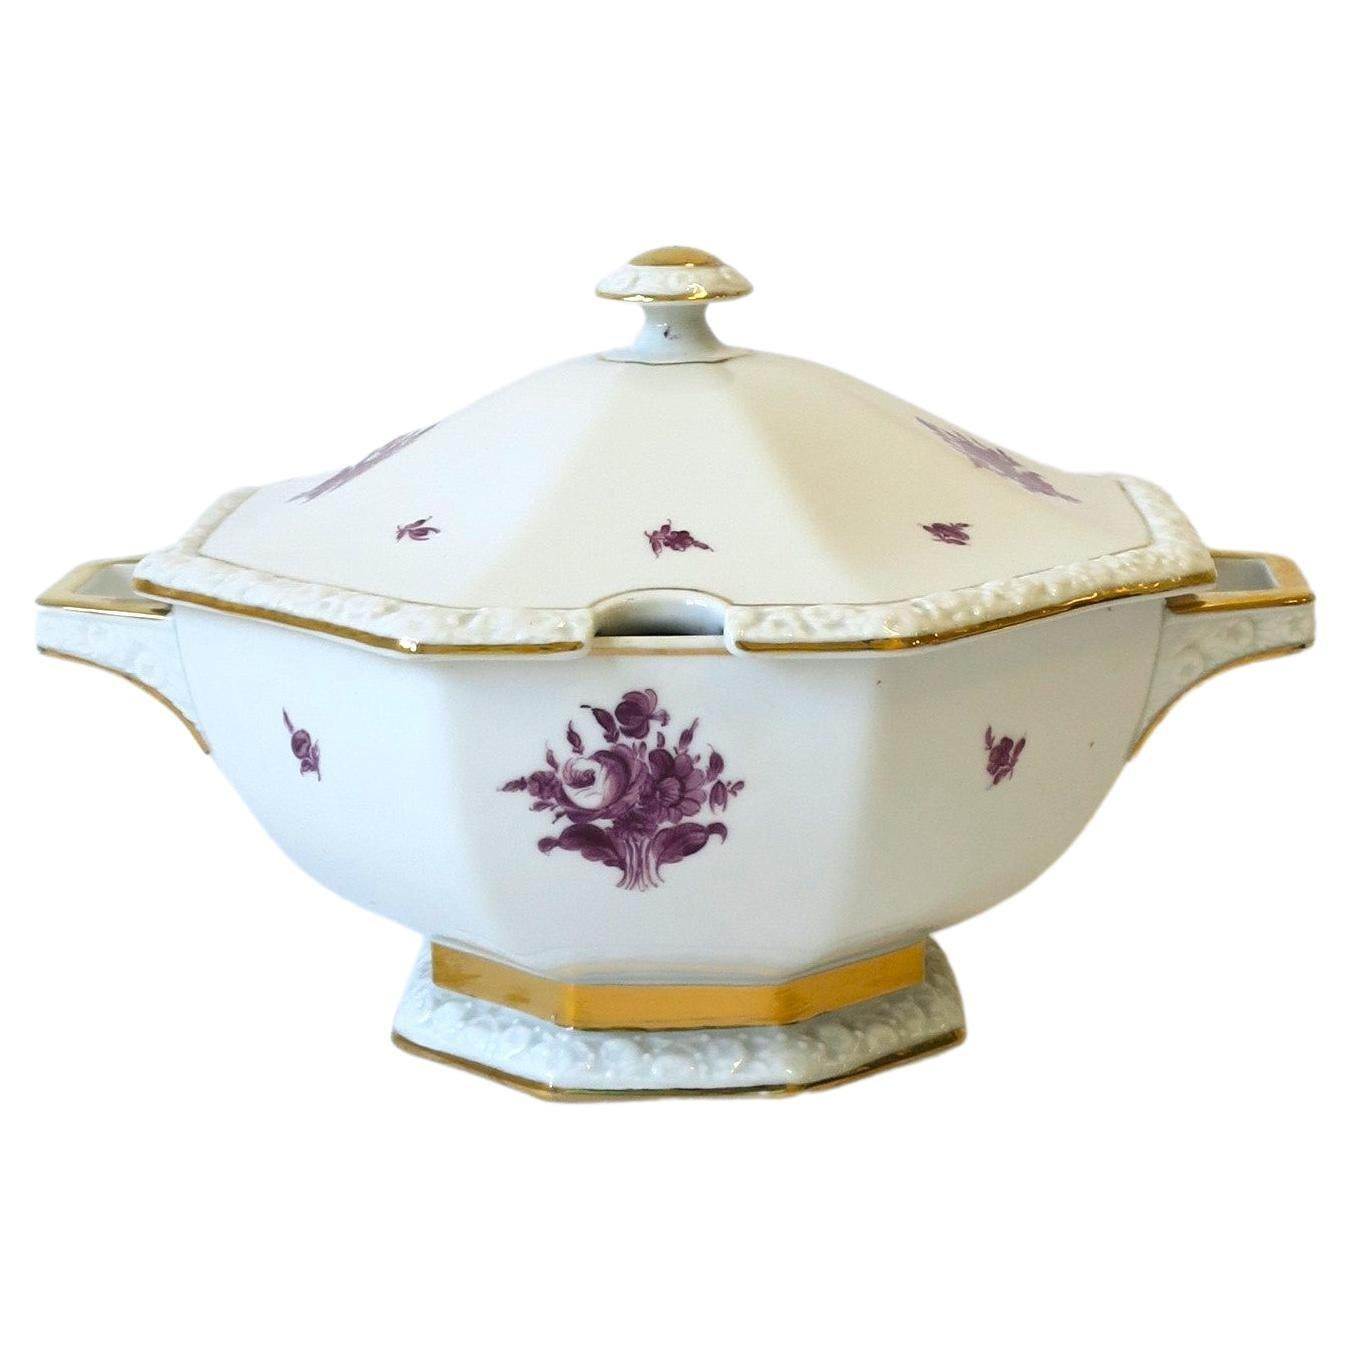 Soup Stew Tureen Porcelain with Gold Detail by Rosenthal, Germany